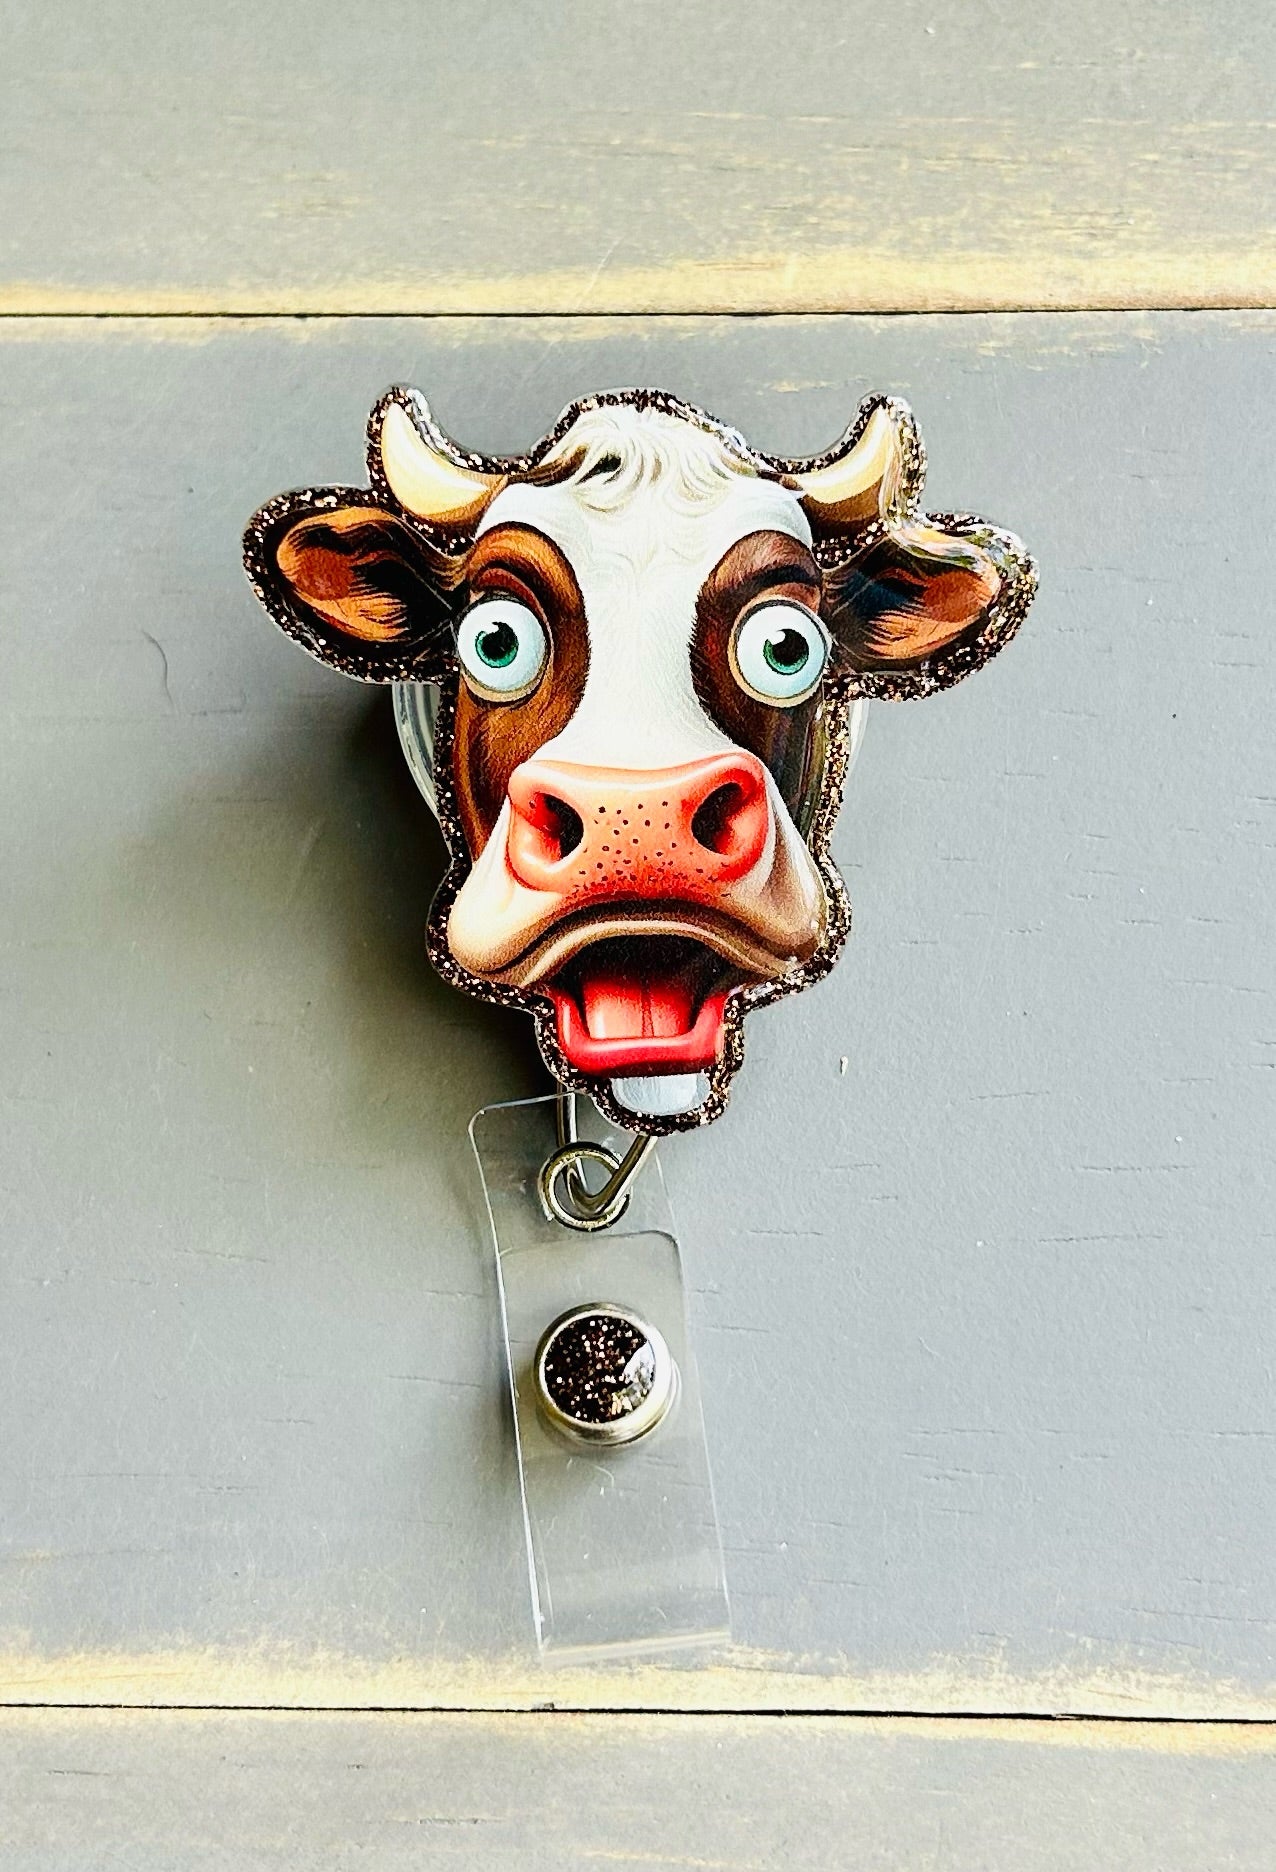 Funny Cow Badge Reel